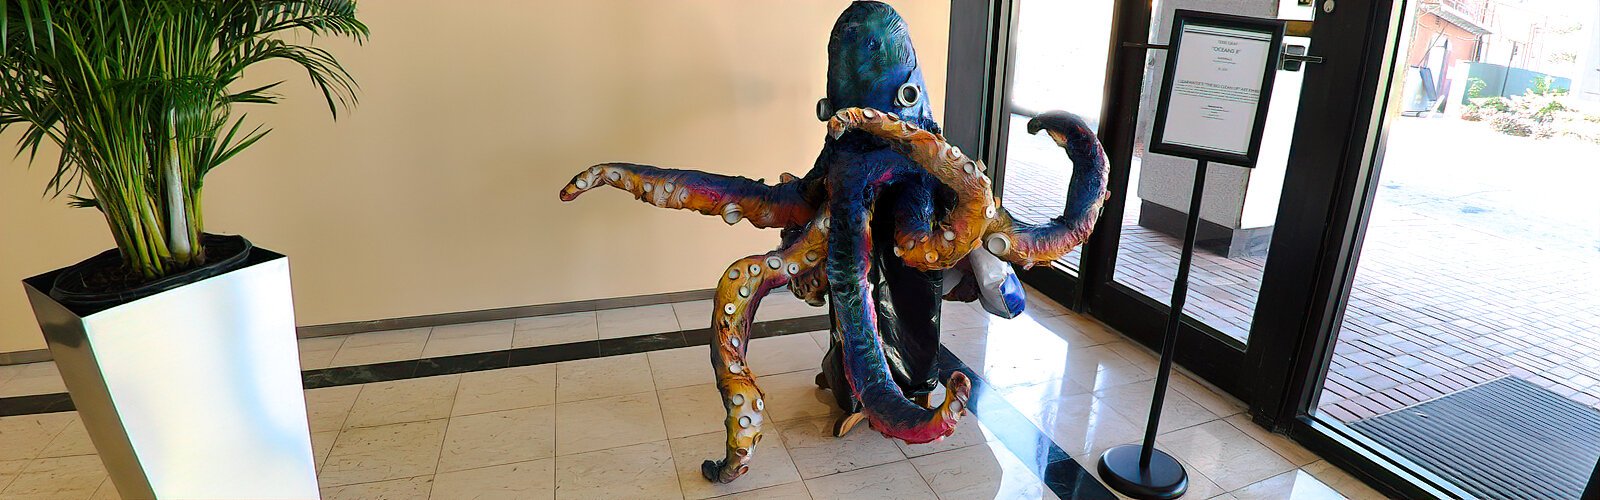 Terri Gray’s “Oceans 8” sculpture is made of recycled beach trash collected during The Big Clean-Up, the largest week-long community clean-up undertaken in October 2021 by Ocean Allies and the city of Clearwater.